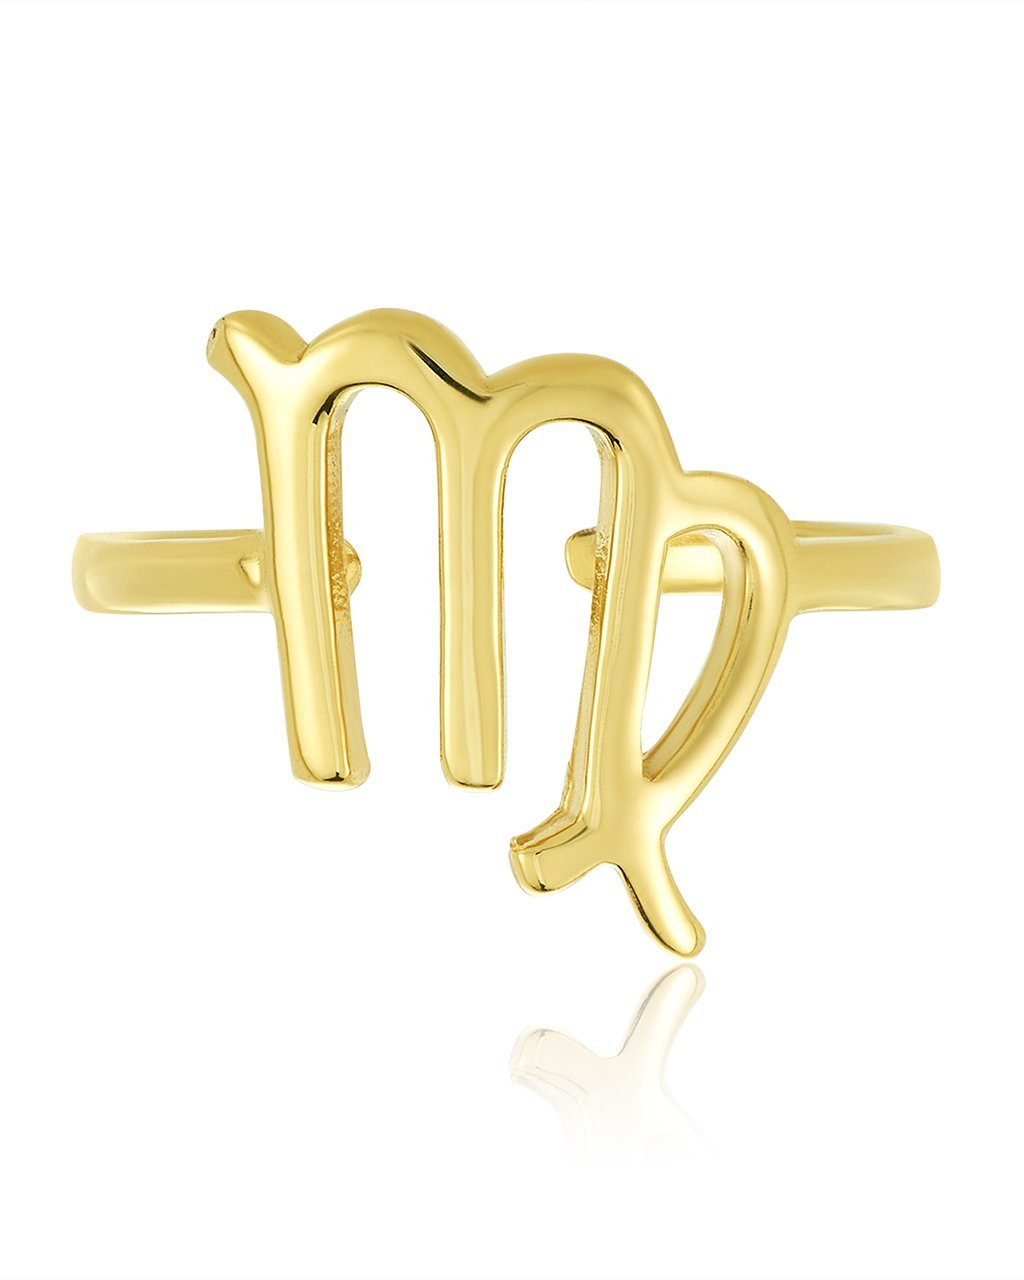 Here’s How To Score A Personalized Zodiac Ring For Only $20 - SHEfinds